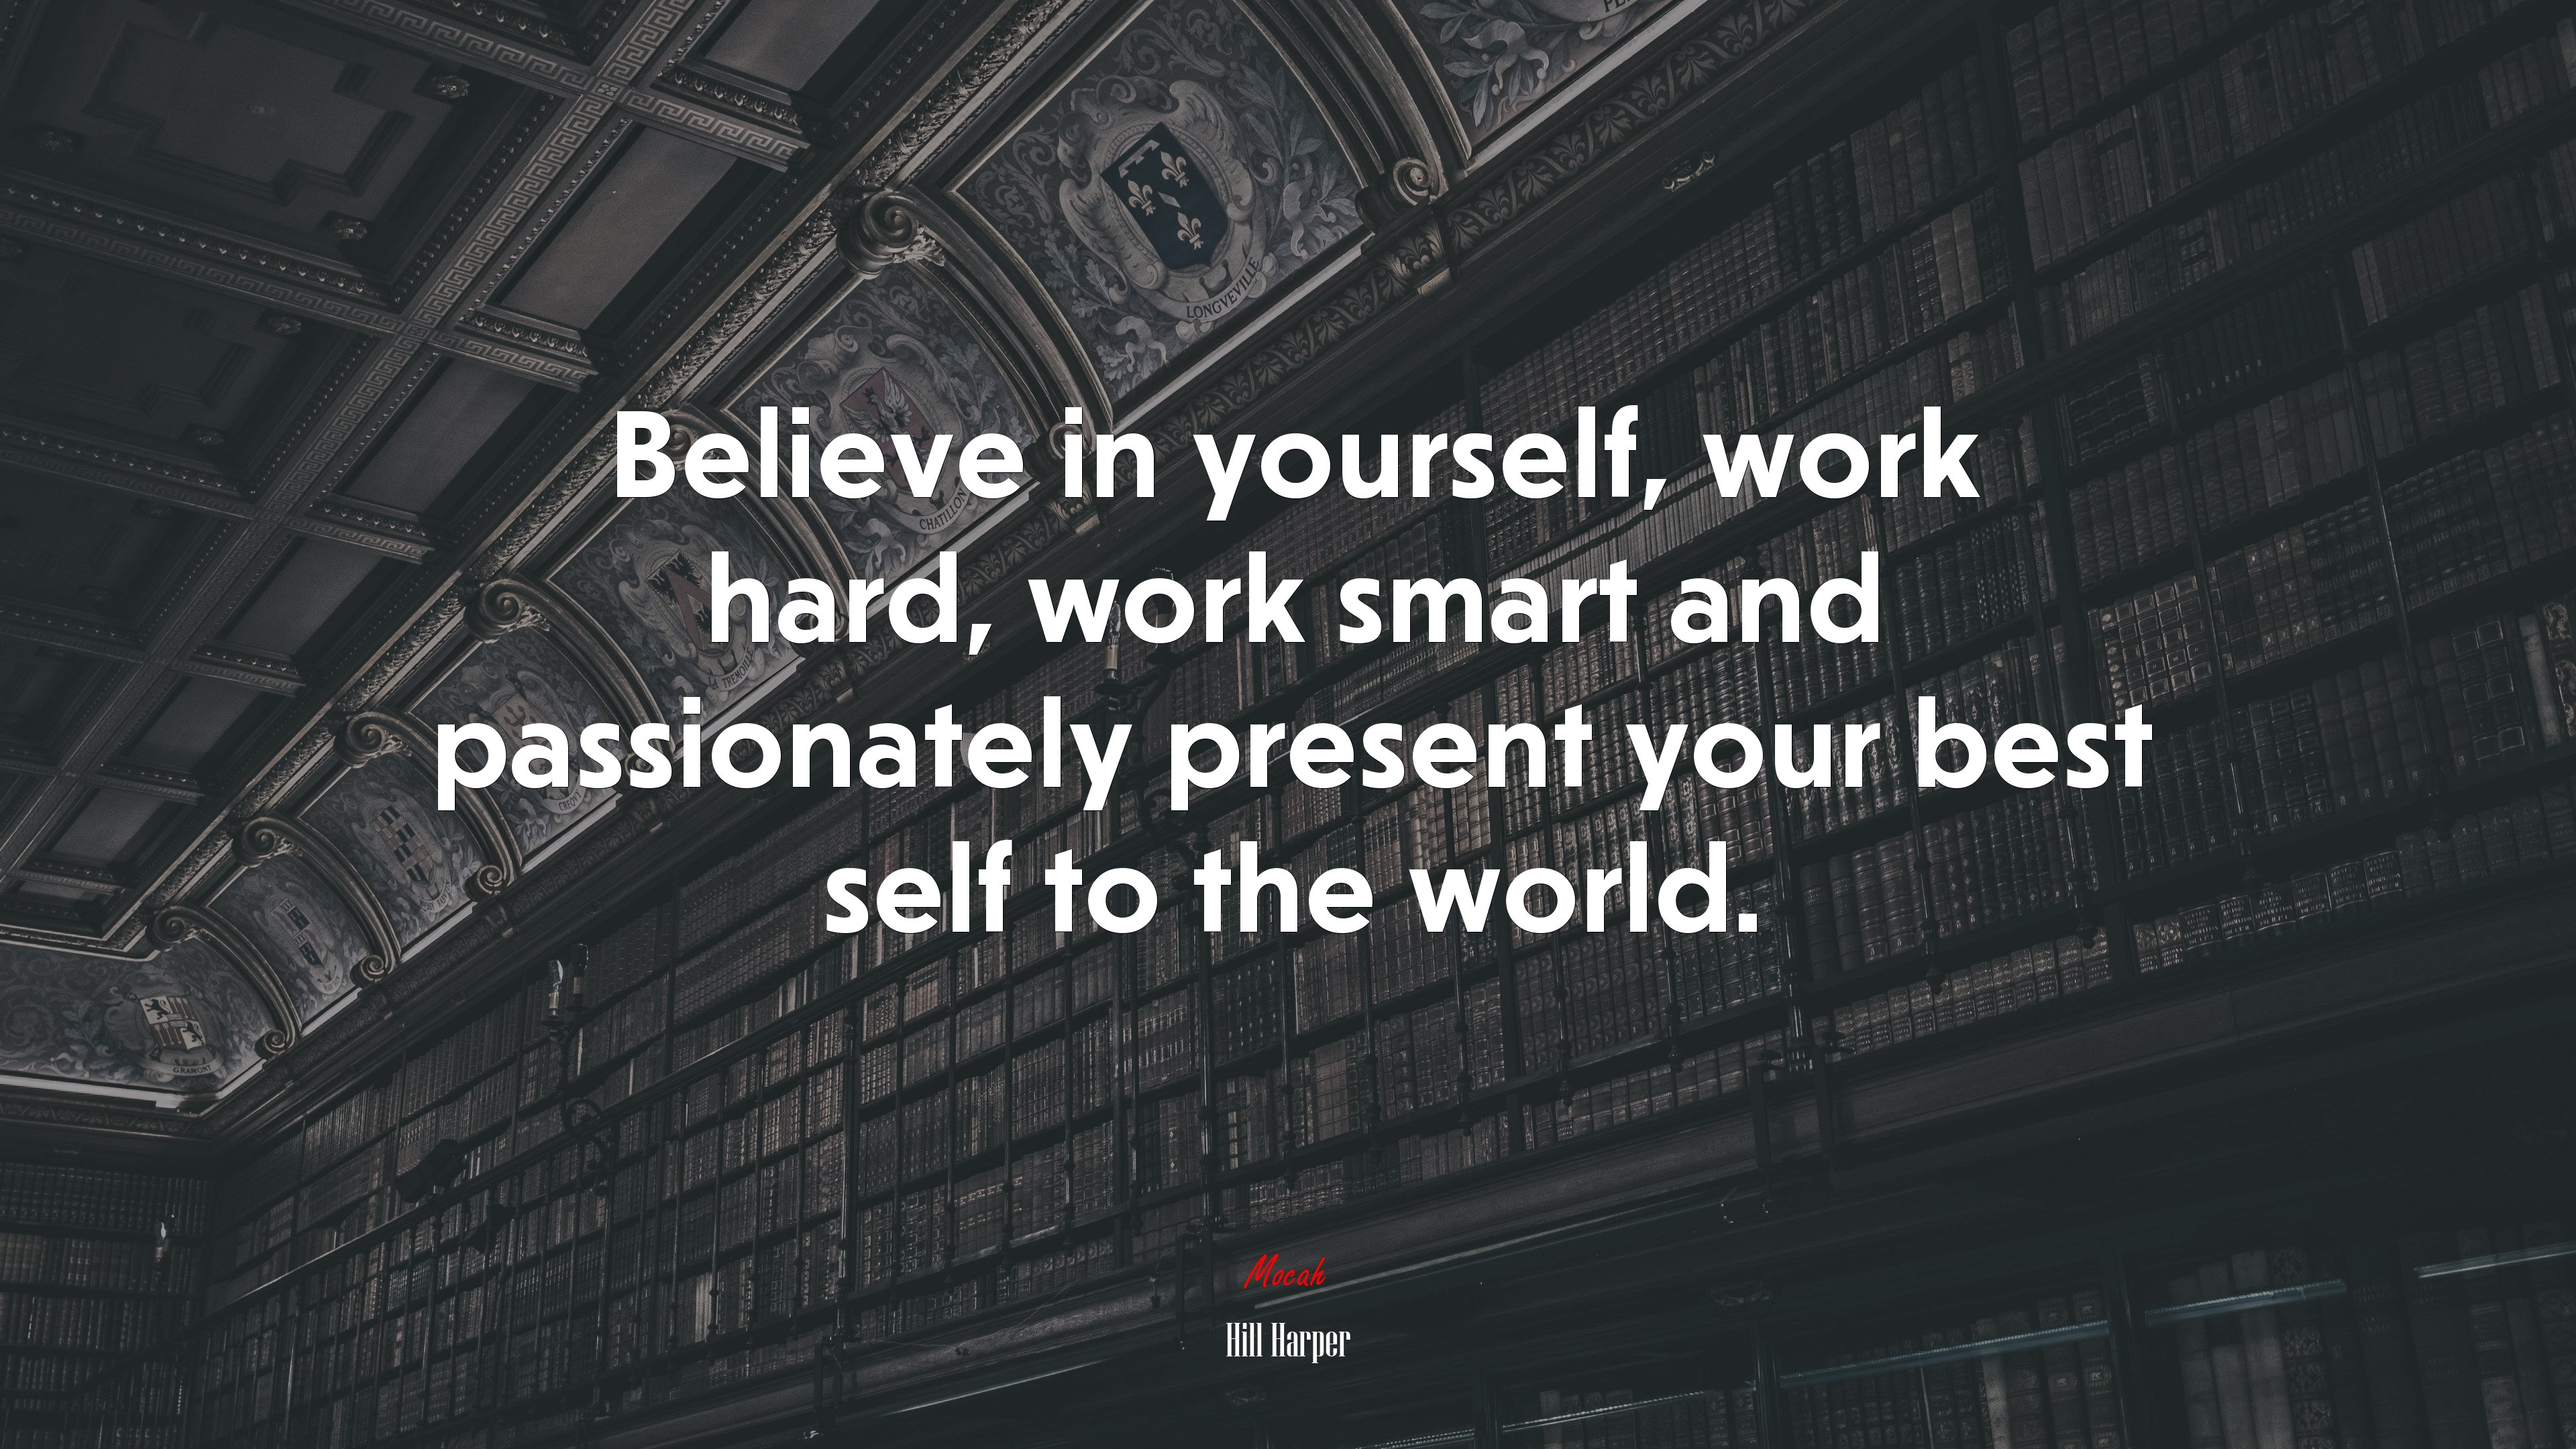 Believe in yourself, work hard, work smart and passionately present your best self to the world. Hill Harper quote, 4k wallpaper HD Wallpaper